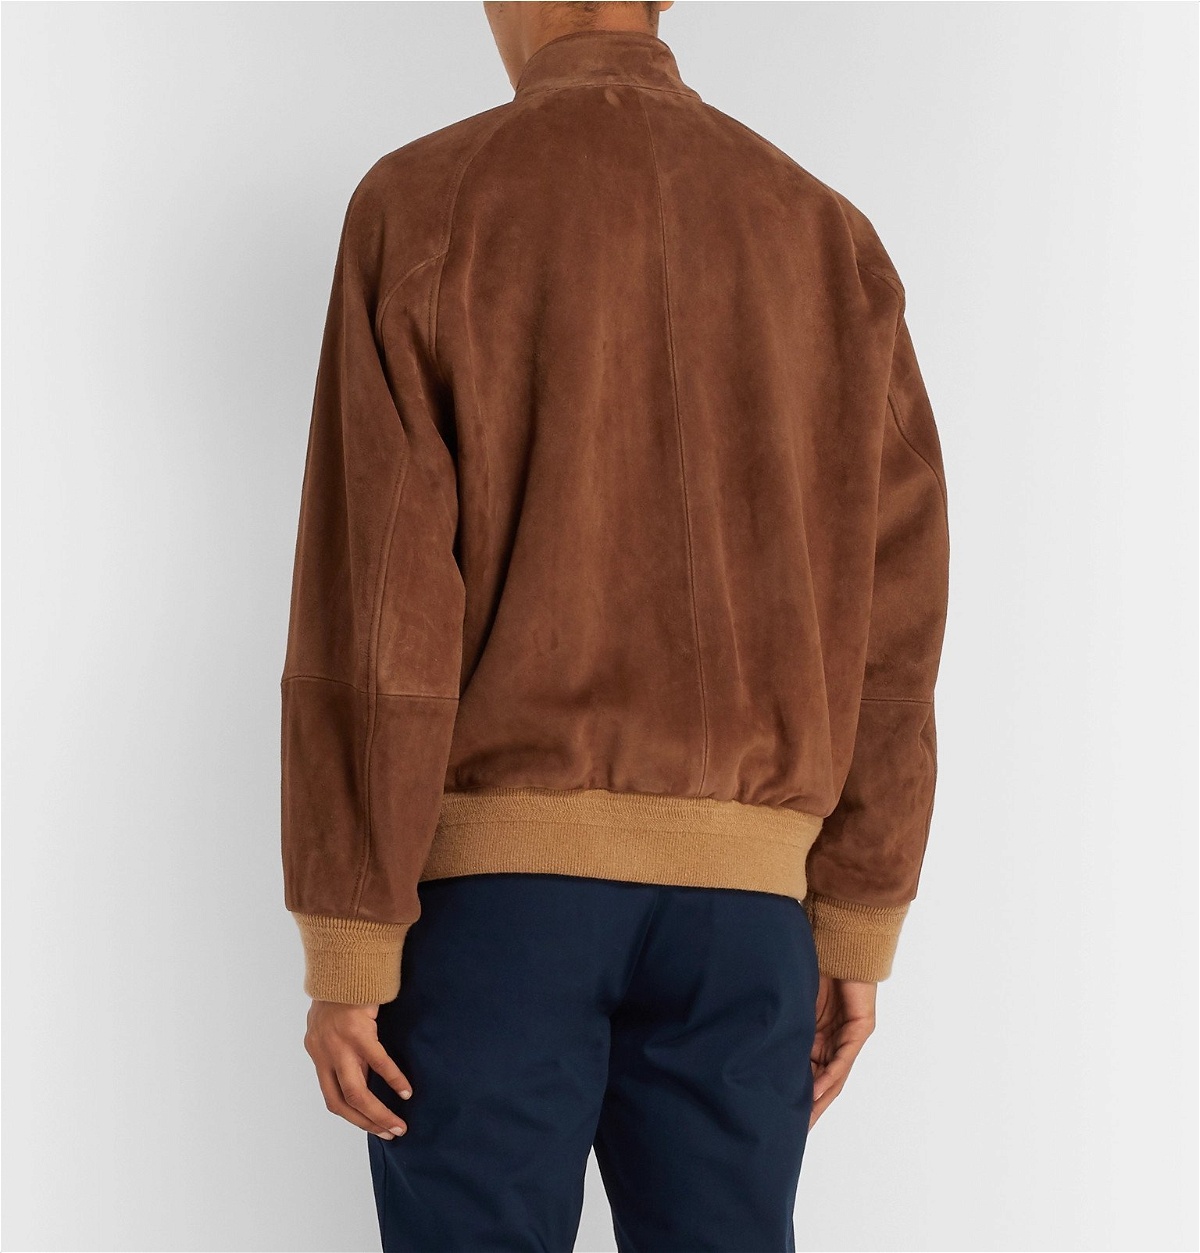 Gucci - Suede Bomber Jacket - Brown Gucci